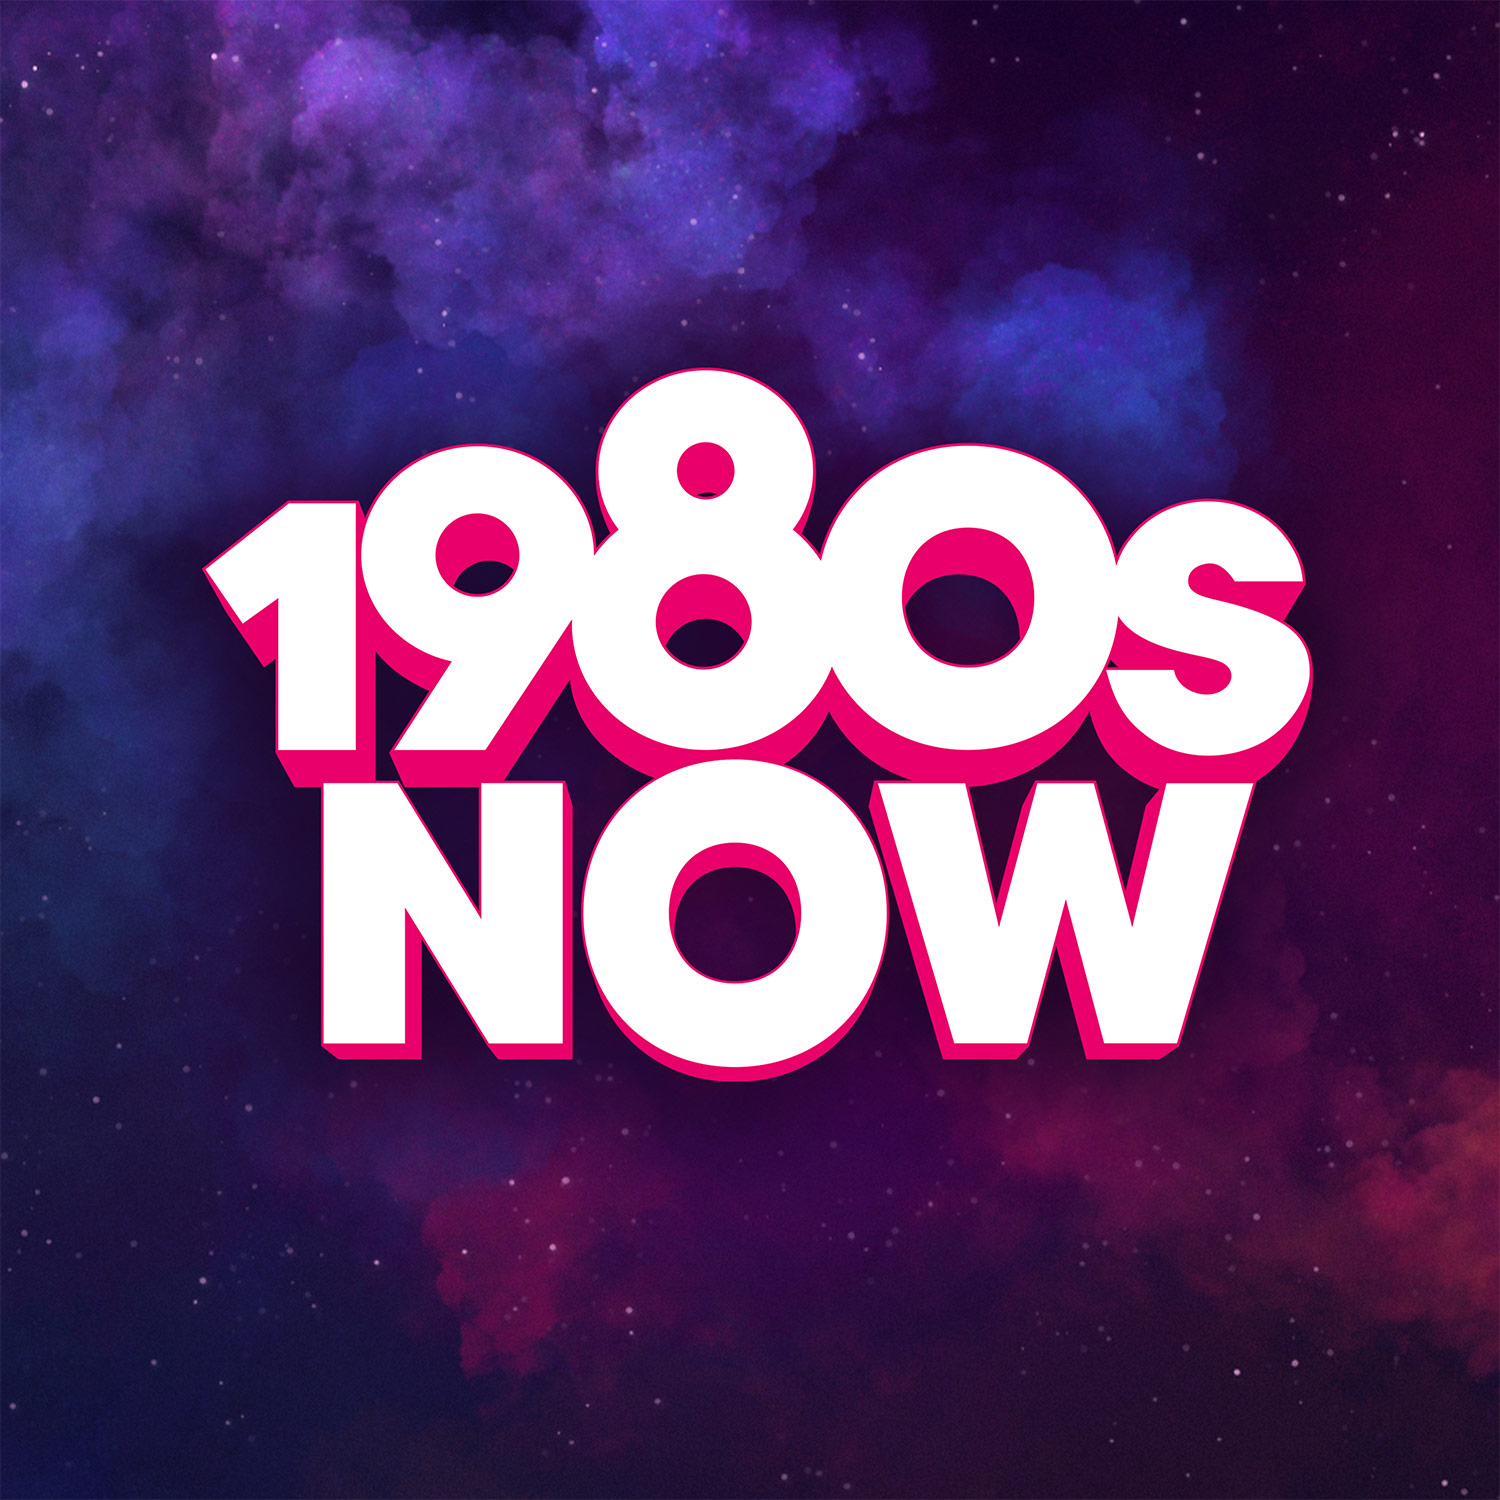 Artwork for 1980s Now